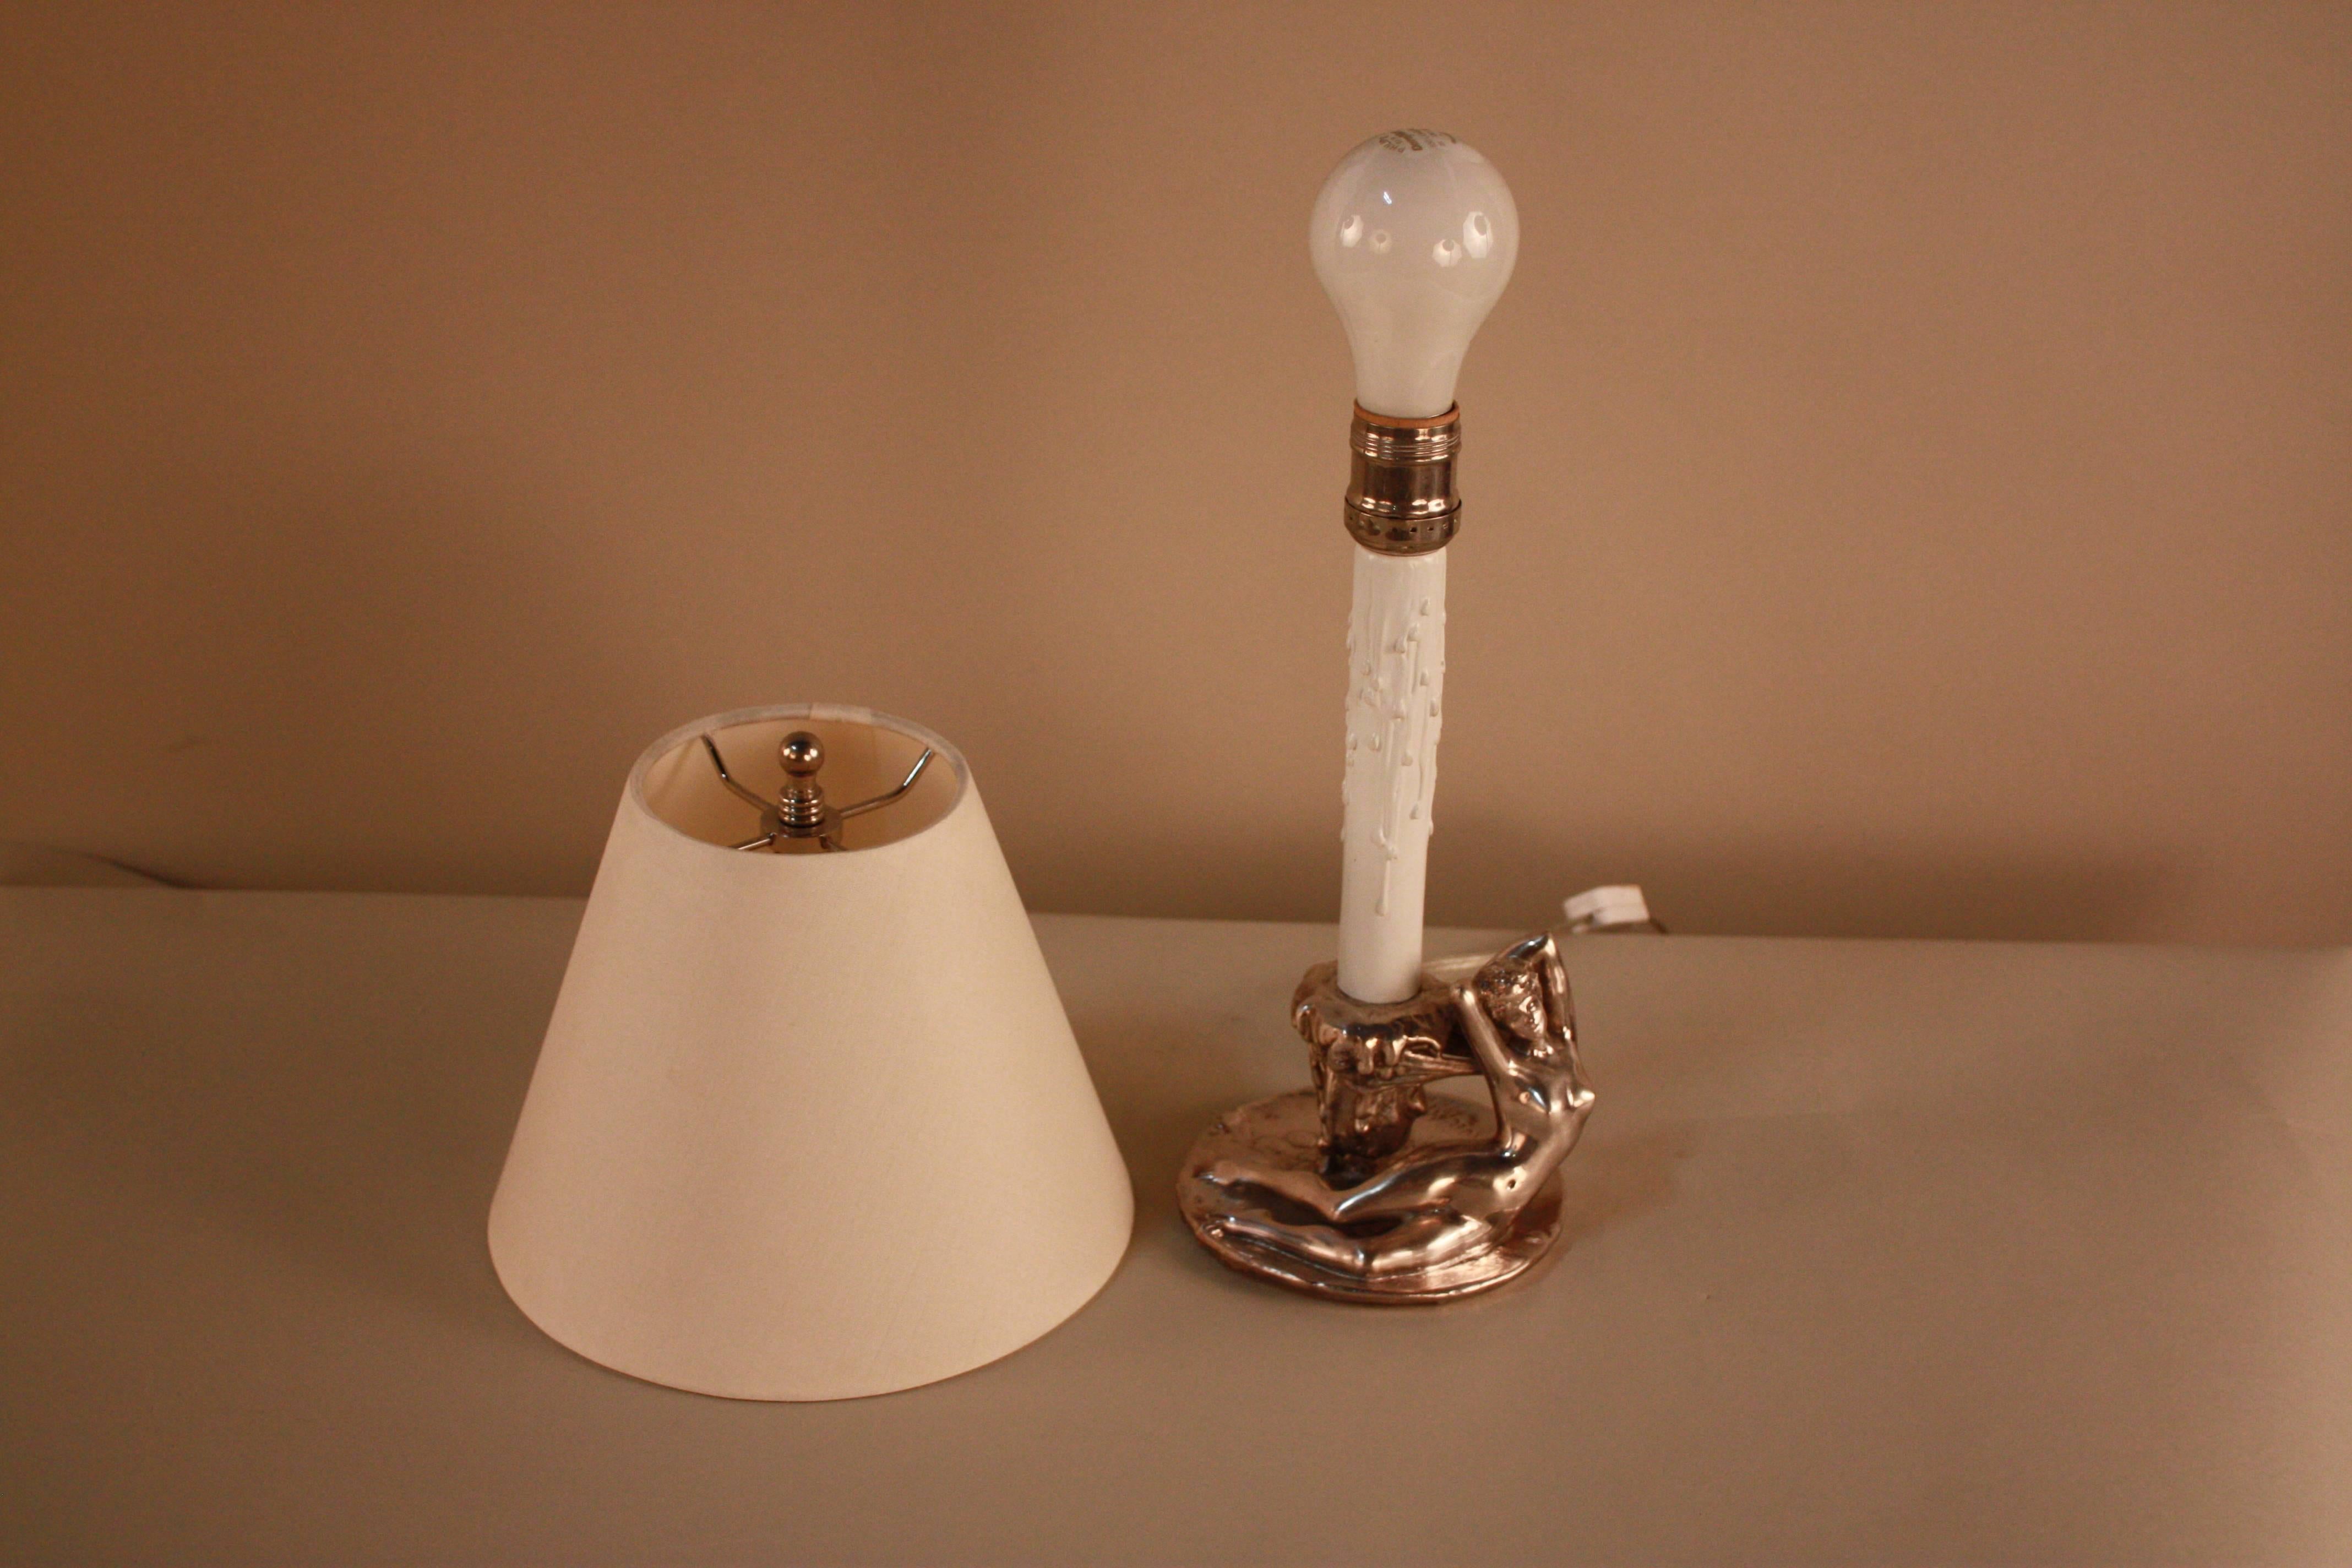 Silver Plate Art Nouveau Sclupture Candle Stick Table Lamp by Jules Jouant